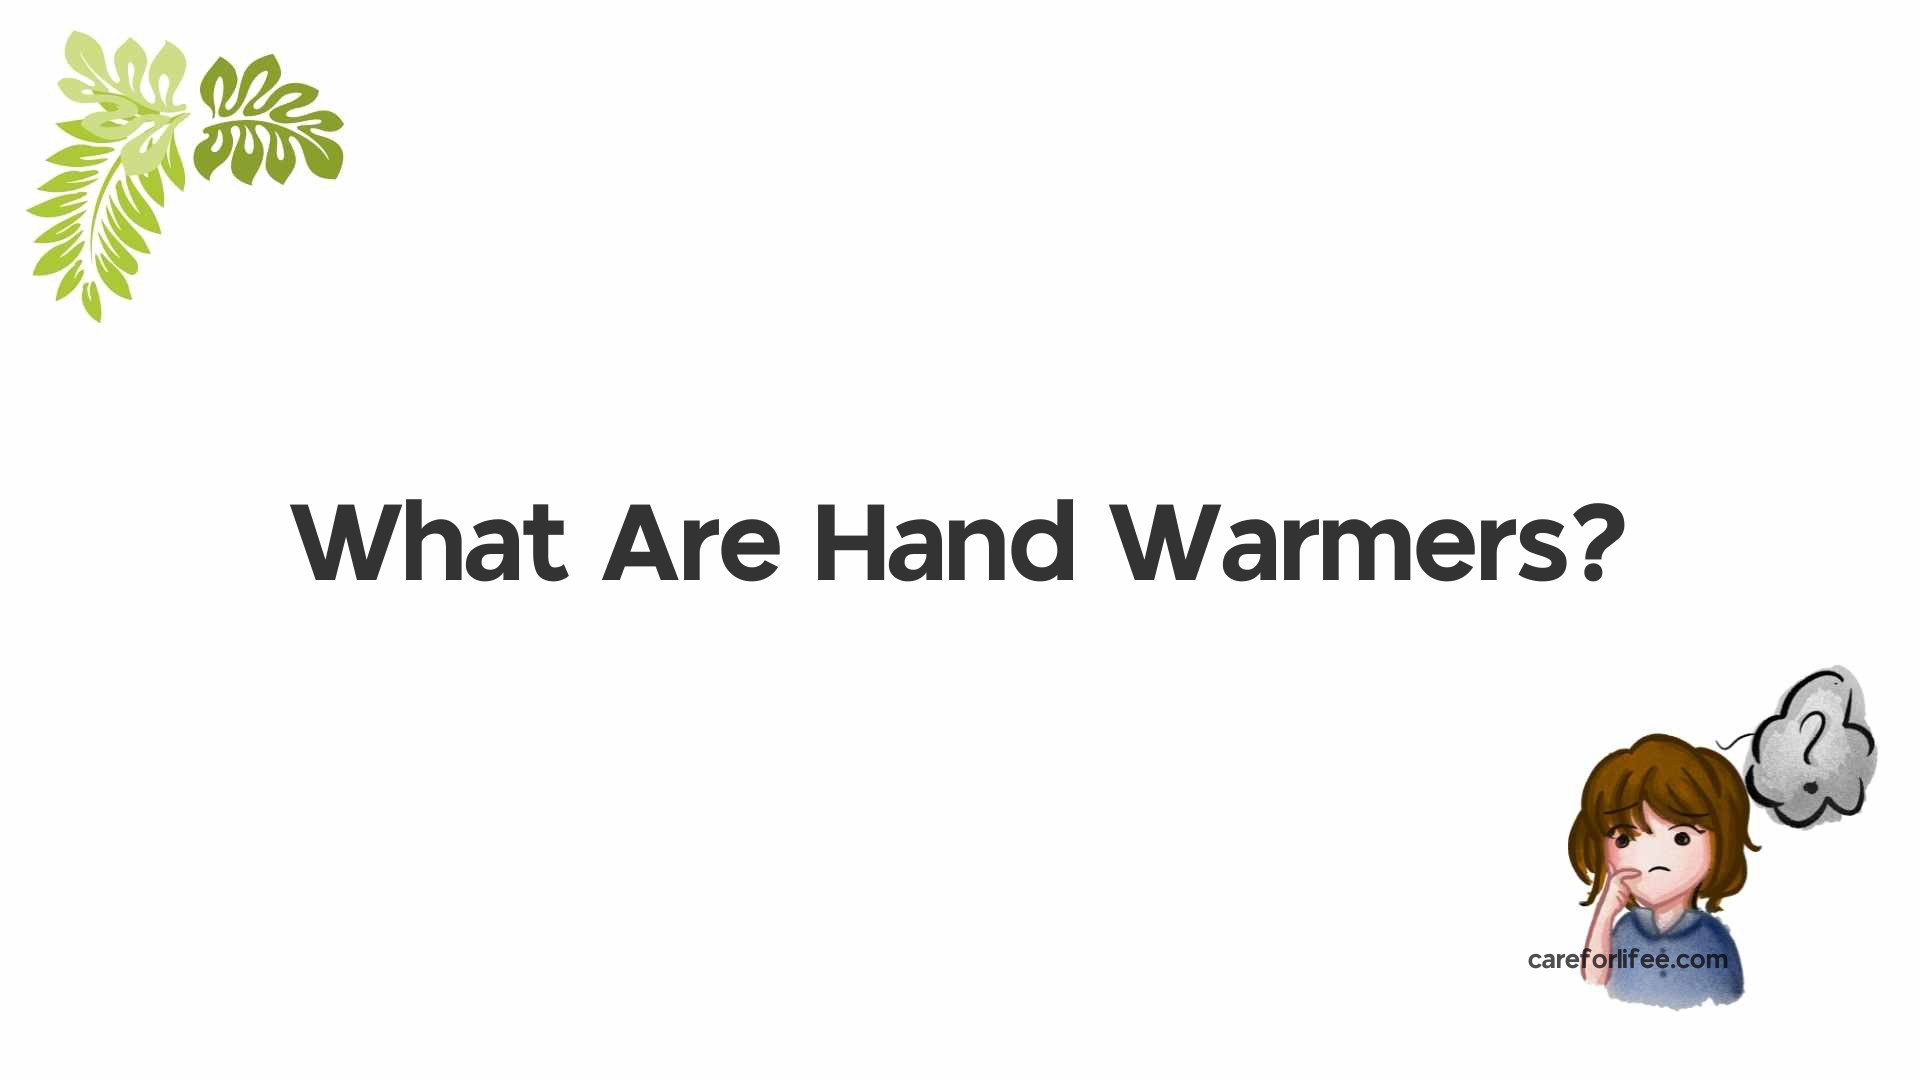 What Are Hand Warmers?